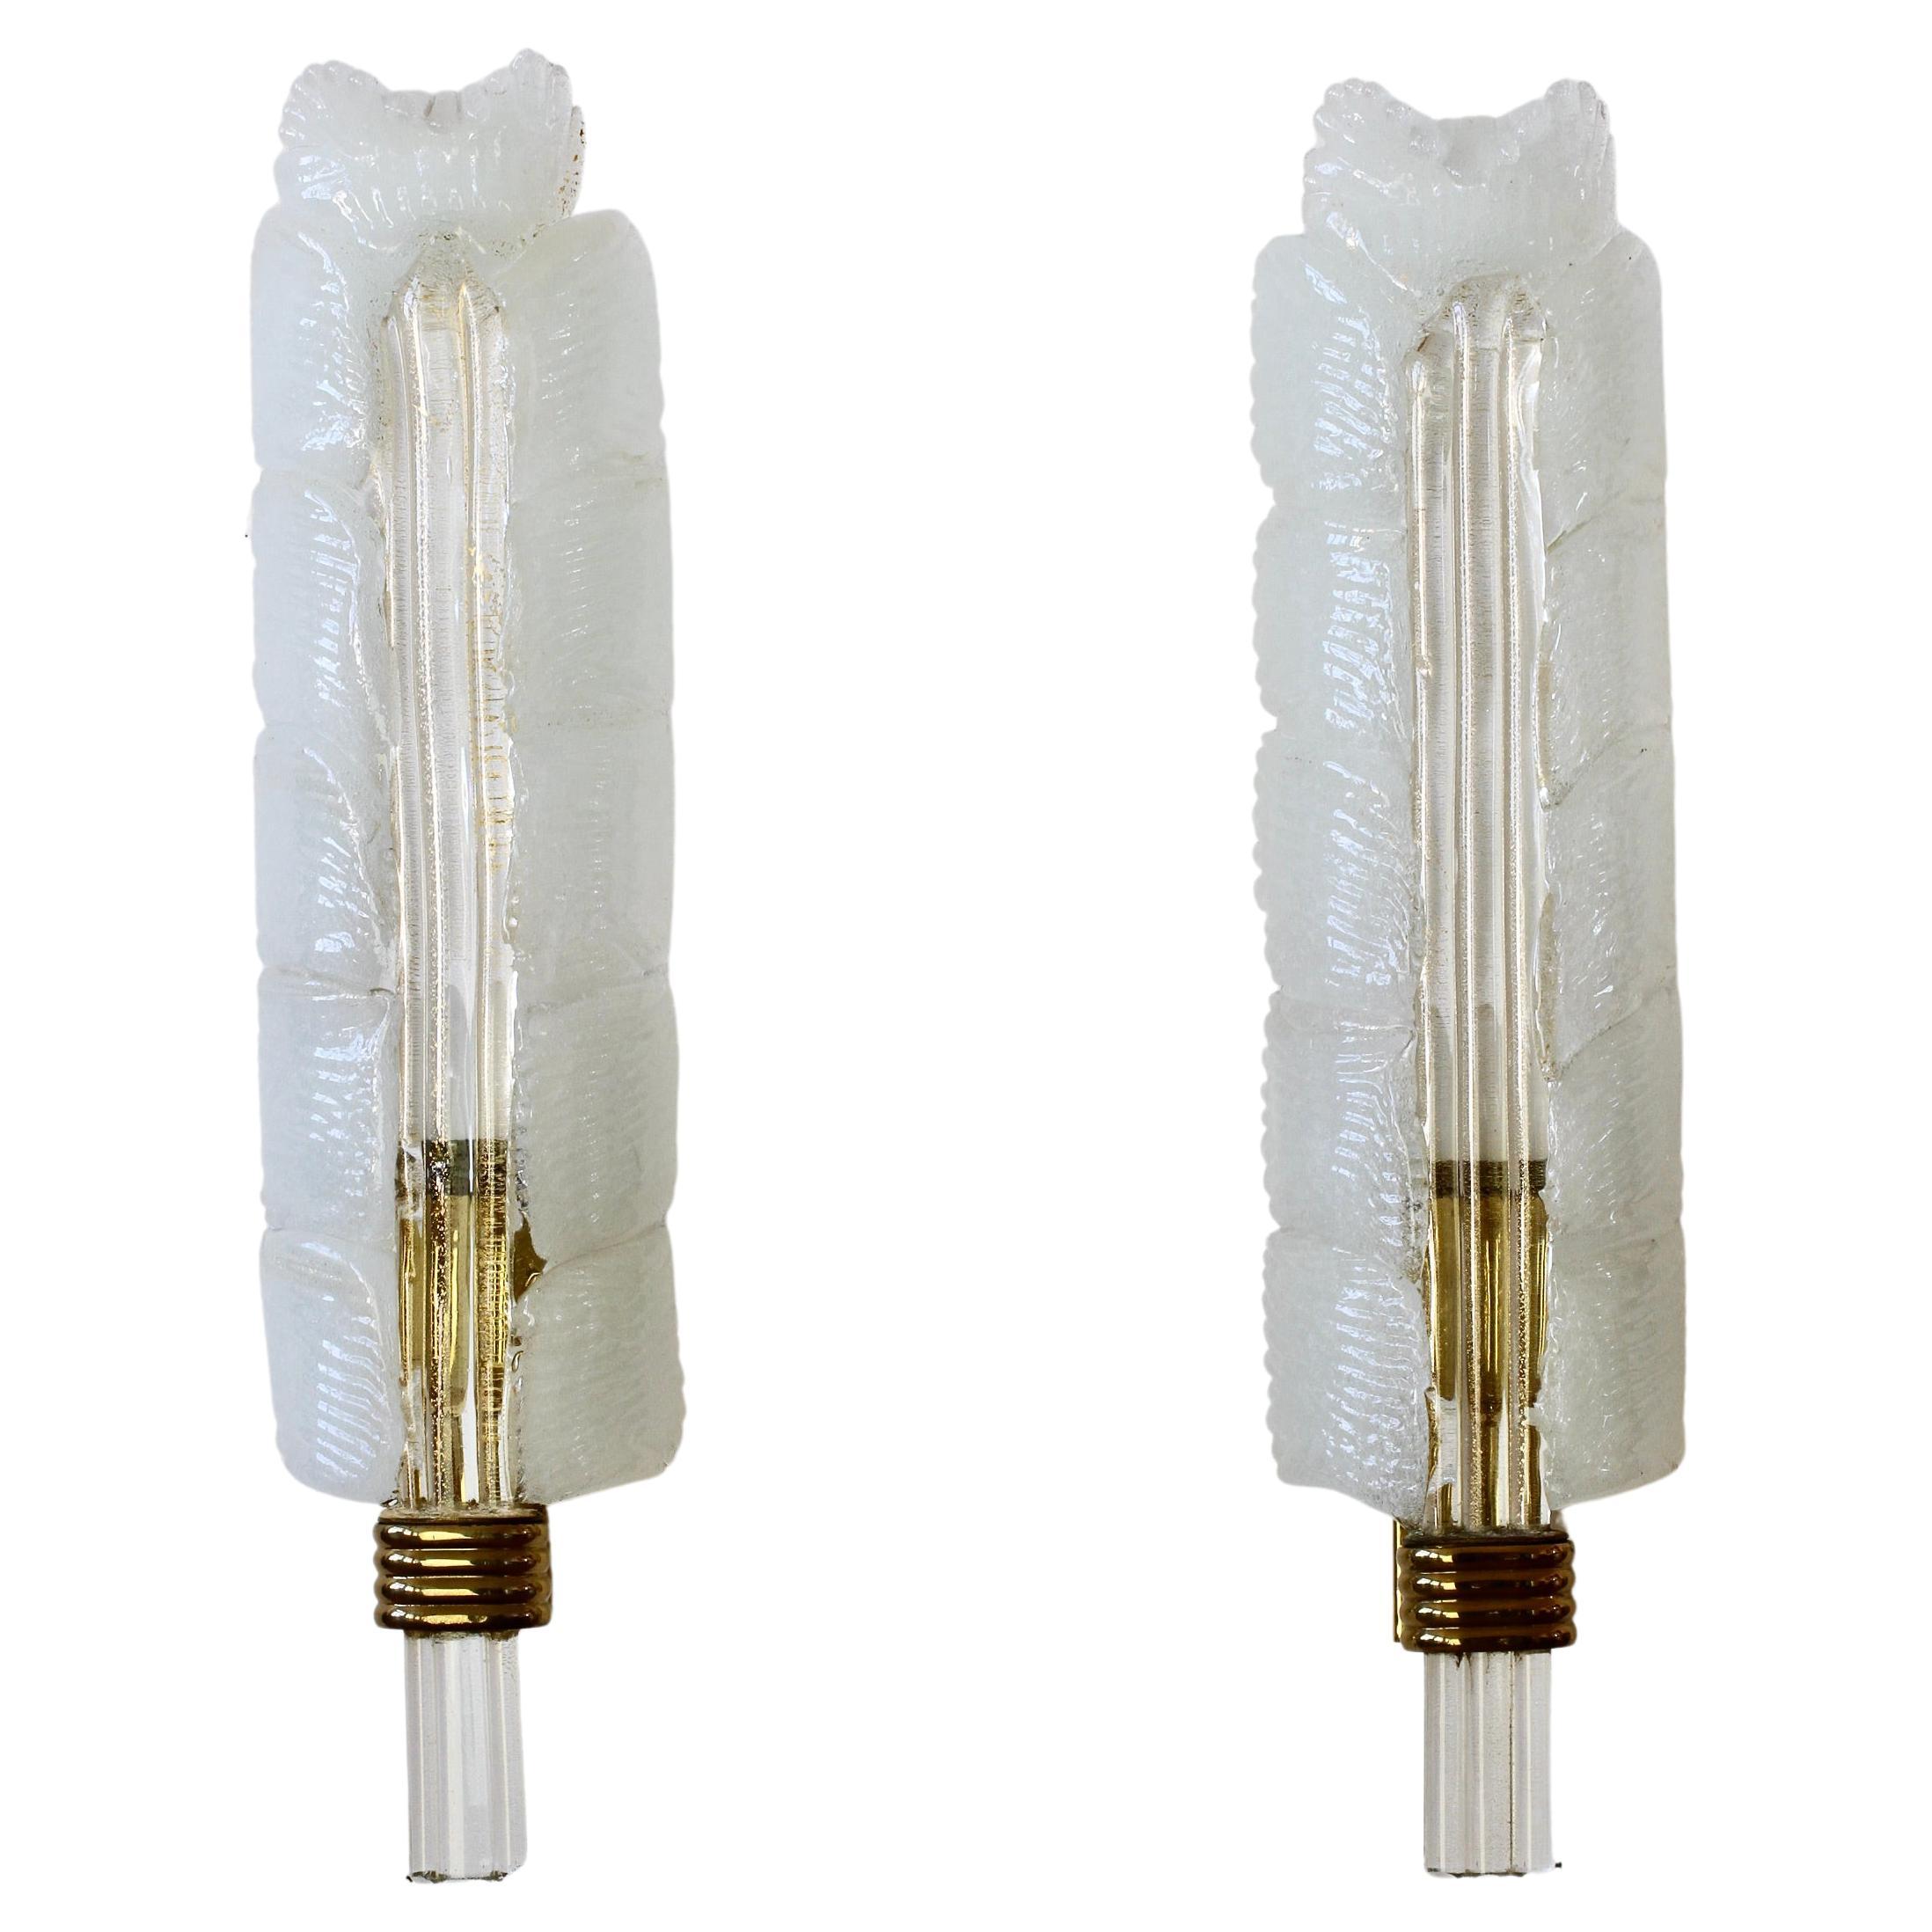 Venini attributed pair of Venetian neoclassical style Murano glass leaf sconces or wall-lights made on the island of Murano, Venice, Italy, circa 1940s. Made of textured opaque glass with gold inclusions within the clear glass stems - handmade and